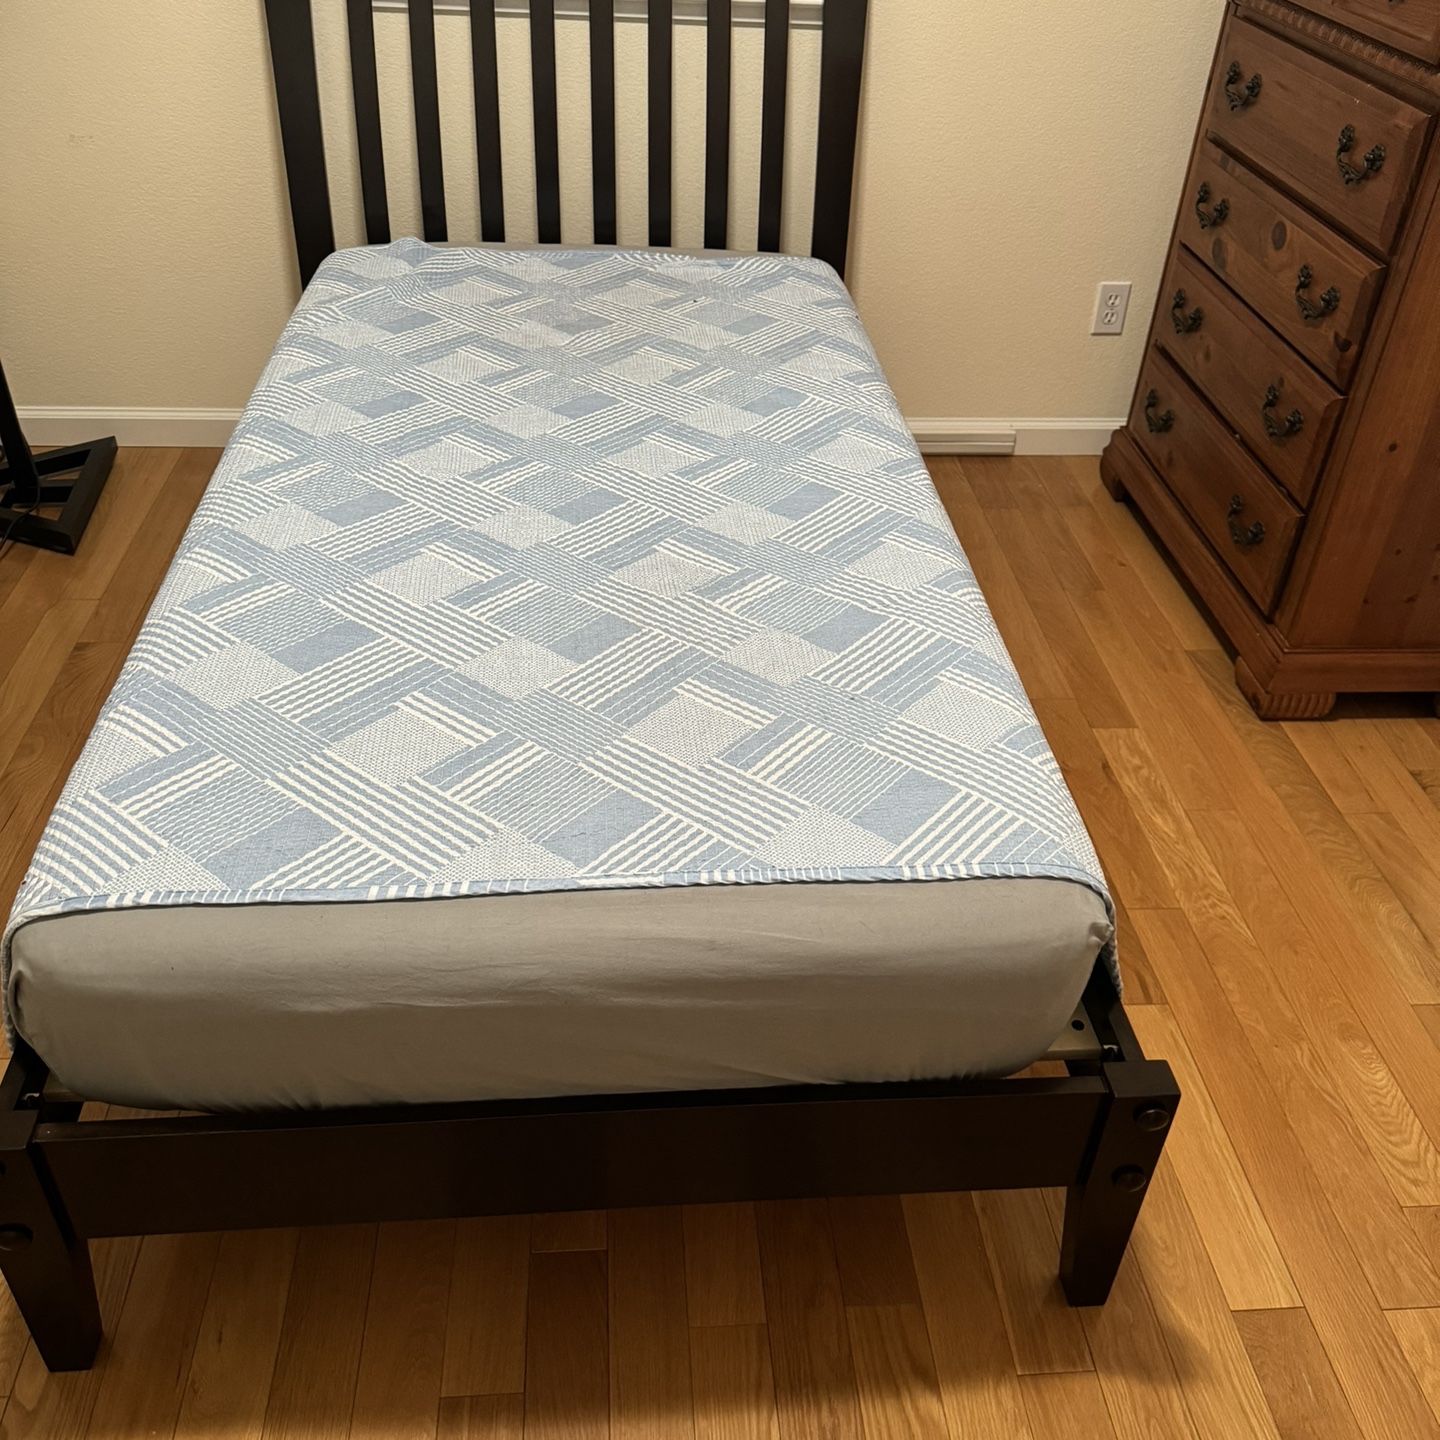 Full-size Mattress And Bed frame (FREE)